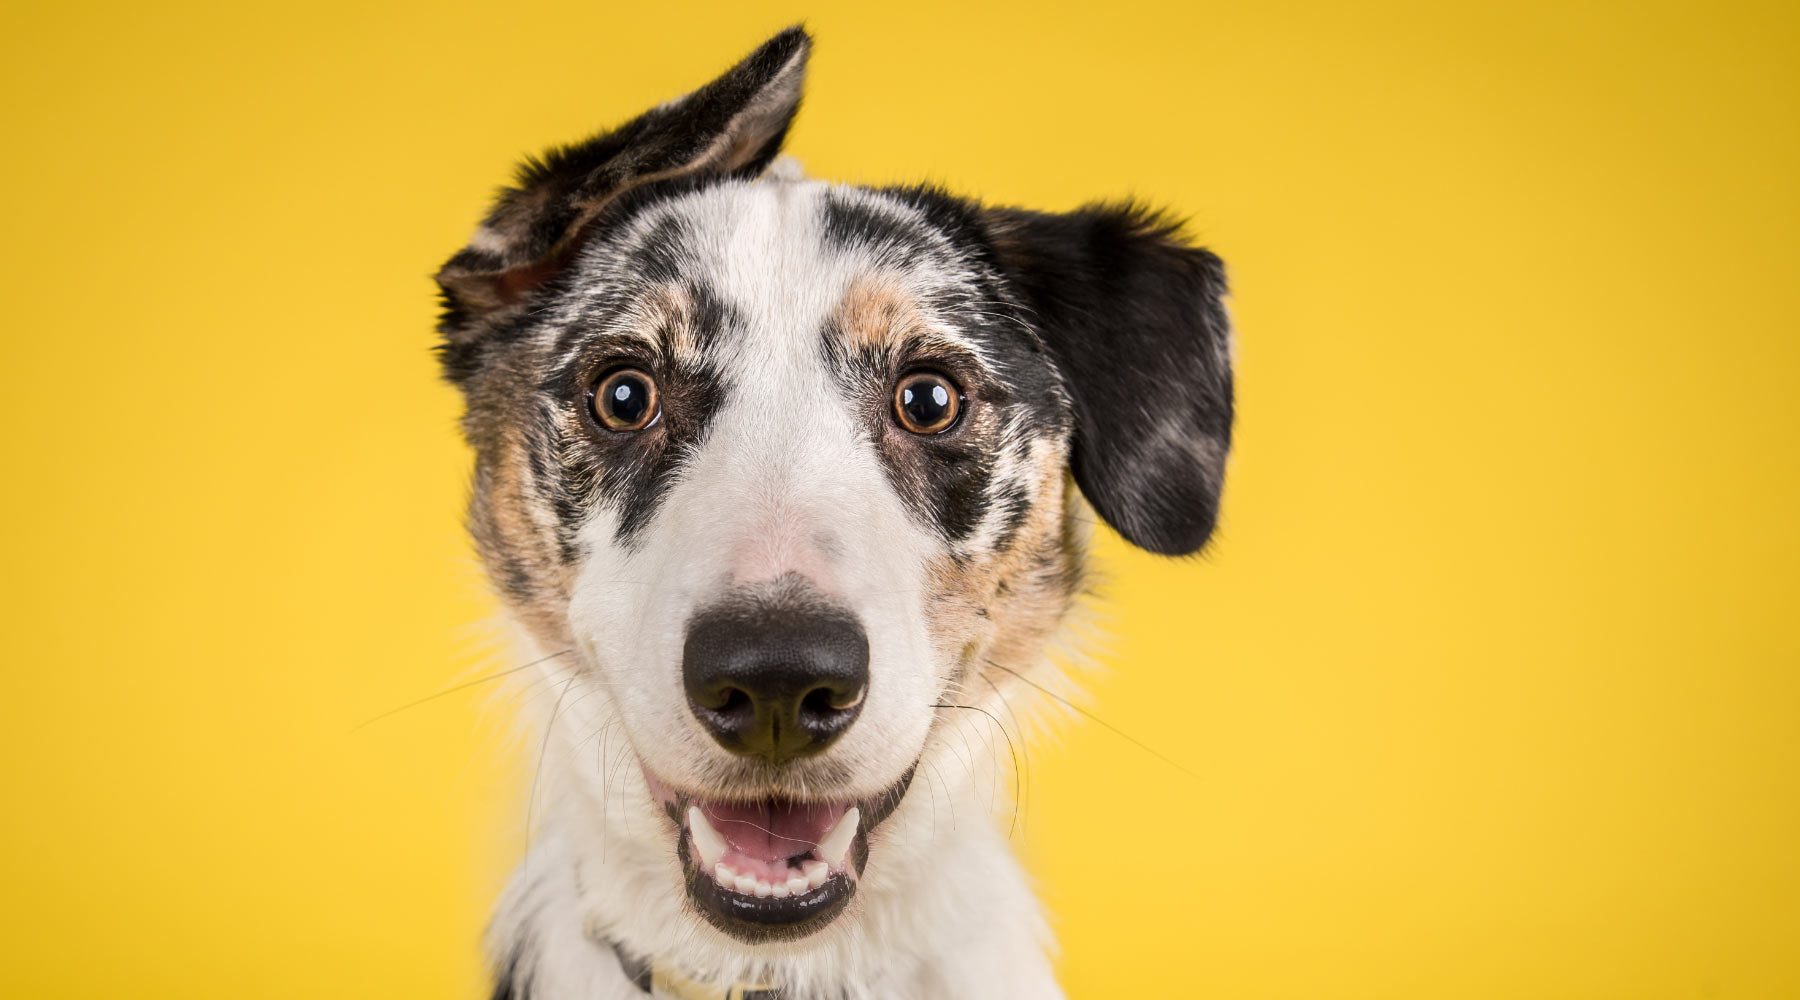 Five Simple Things You Can Do To Make Your Dog Happier